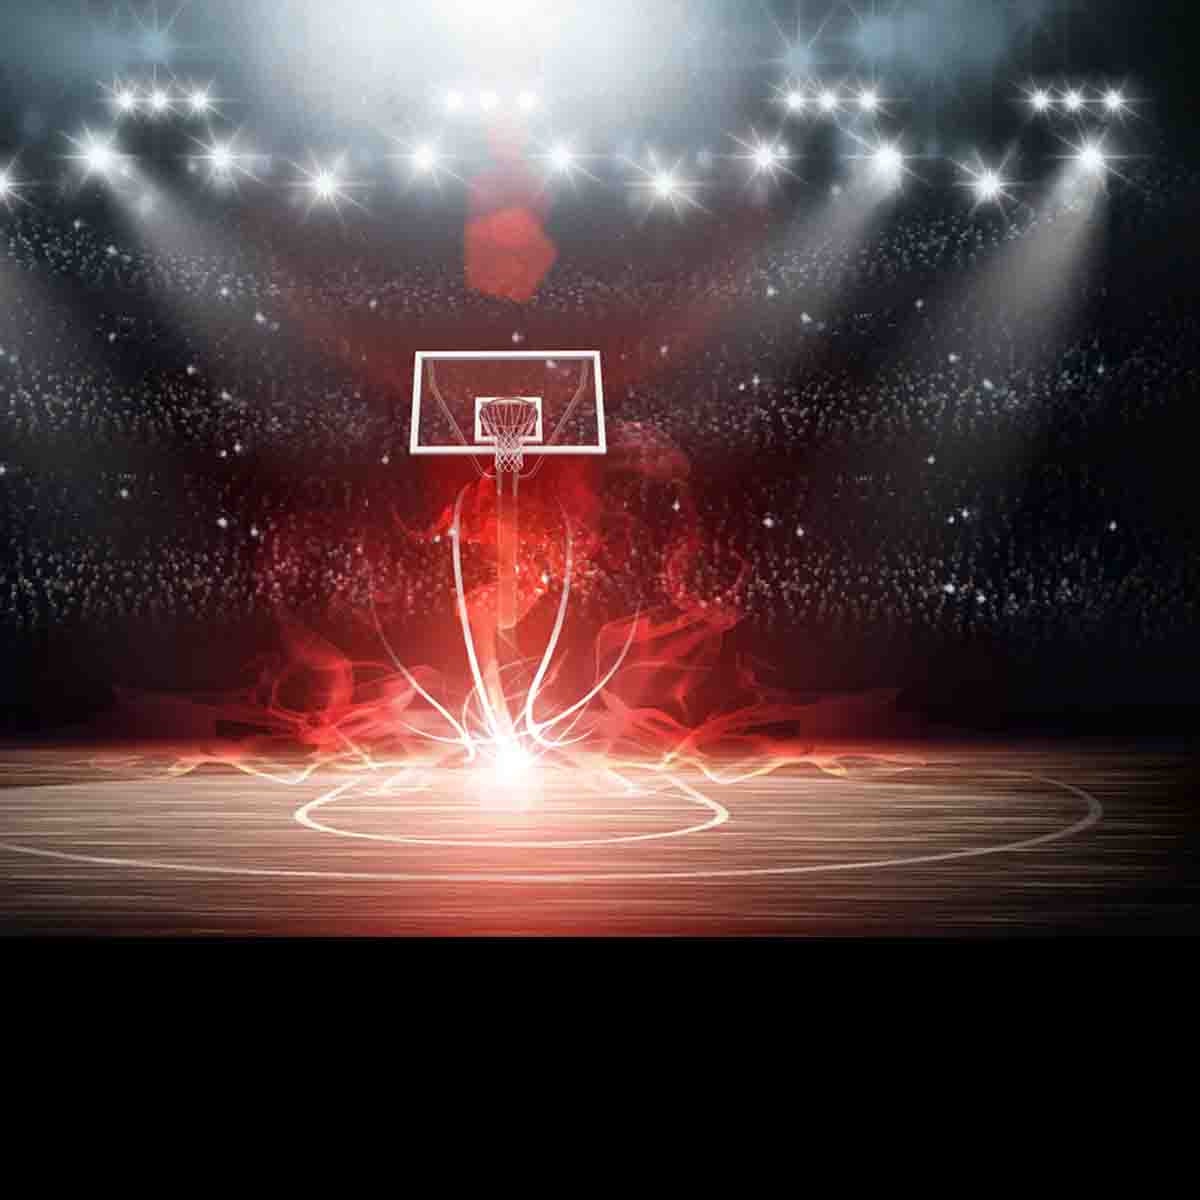 Basketball Arena with Red Flame Wallpaper Teen Boy Bedroom Mural